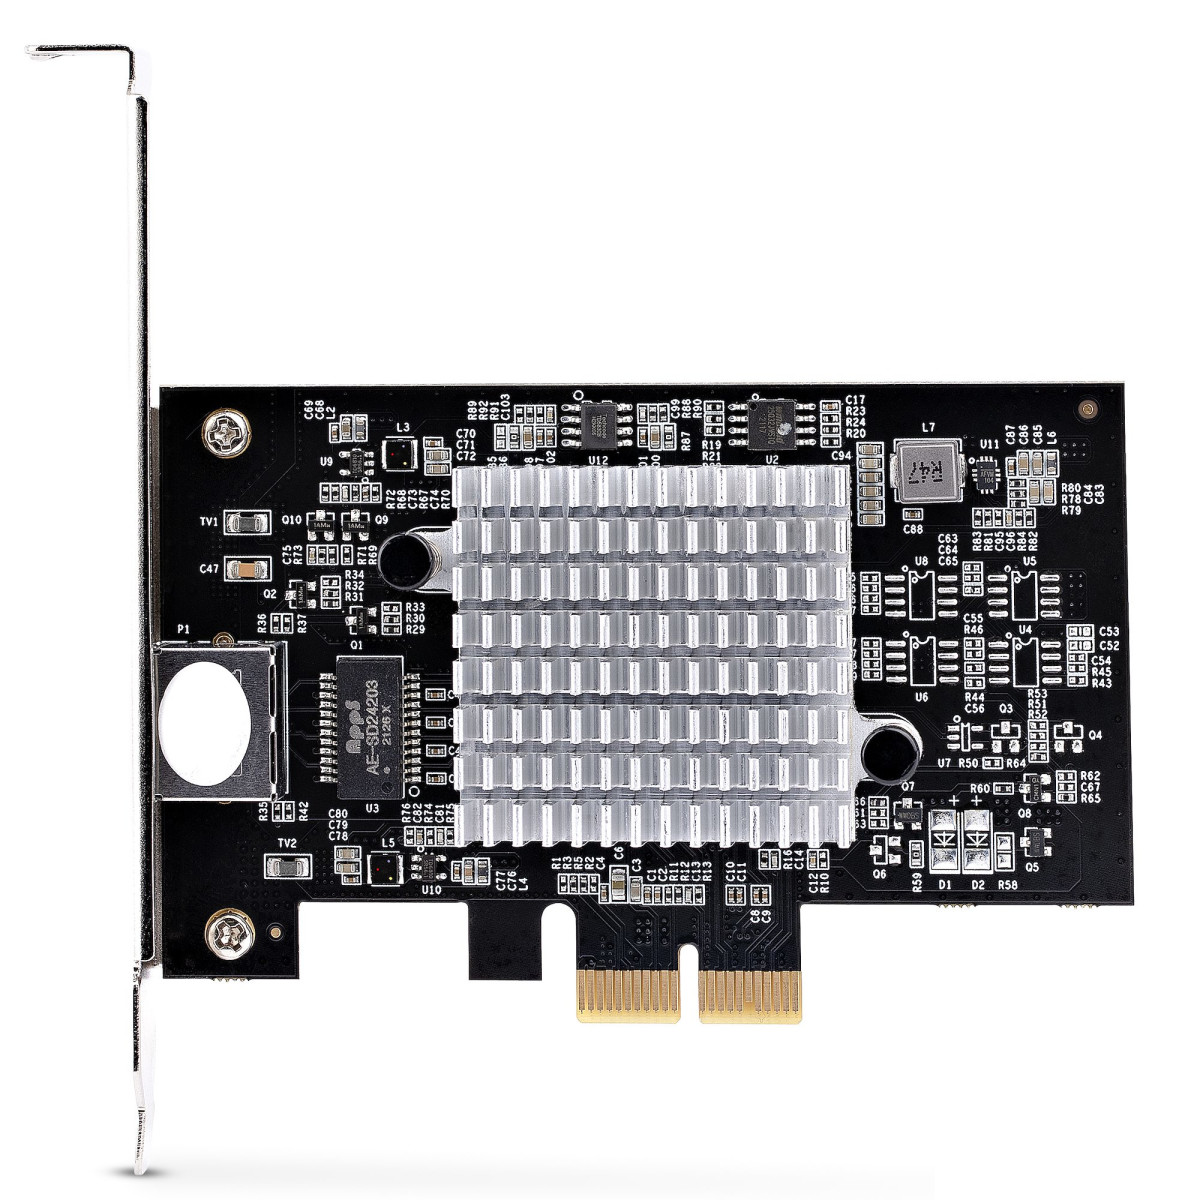 1-Port 10Gbps PCIe Network Adapter Card